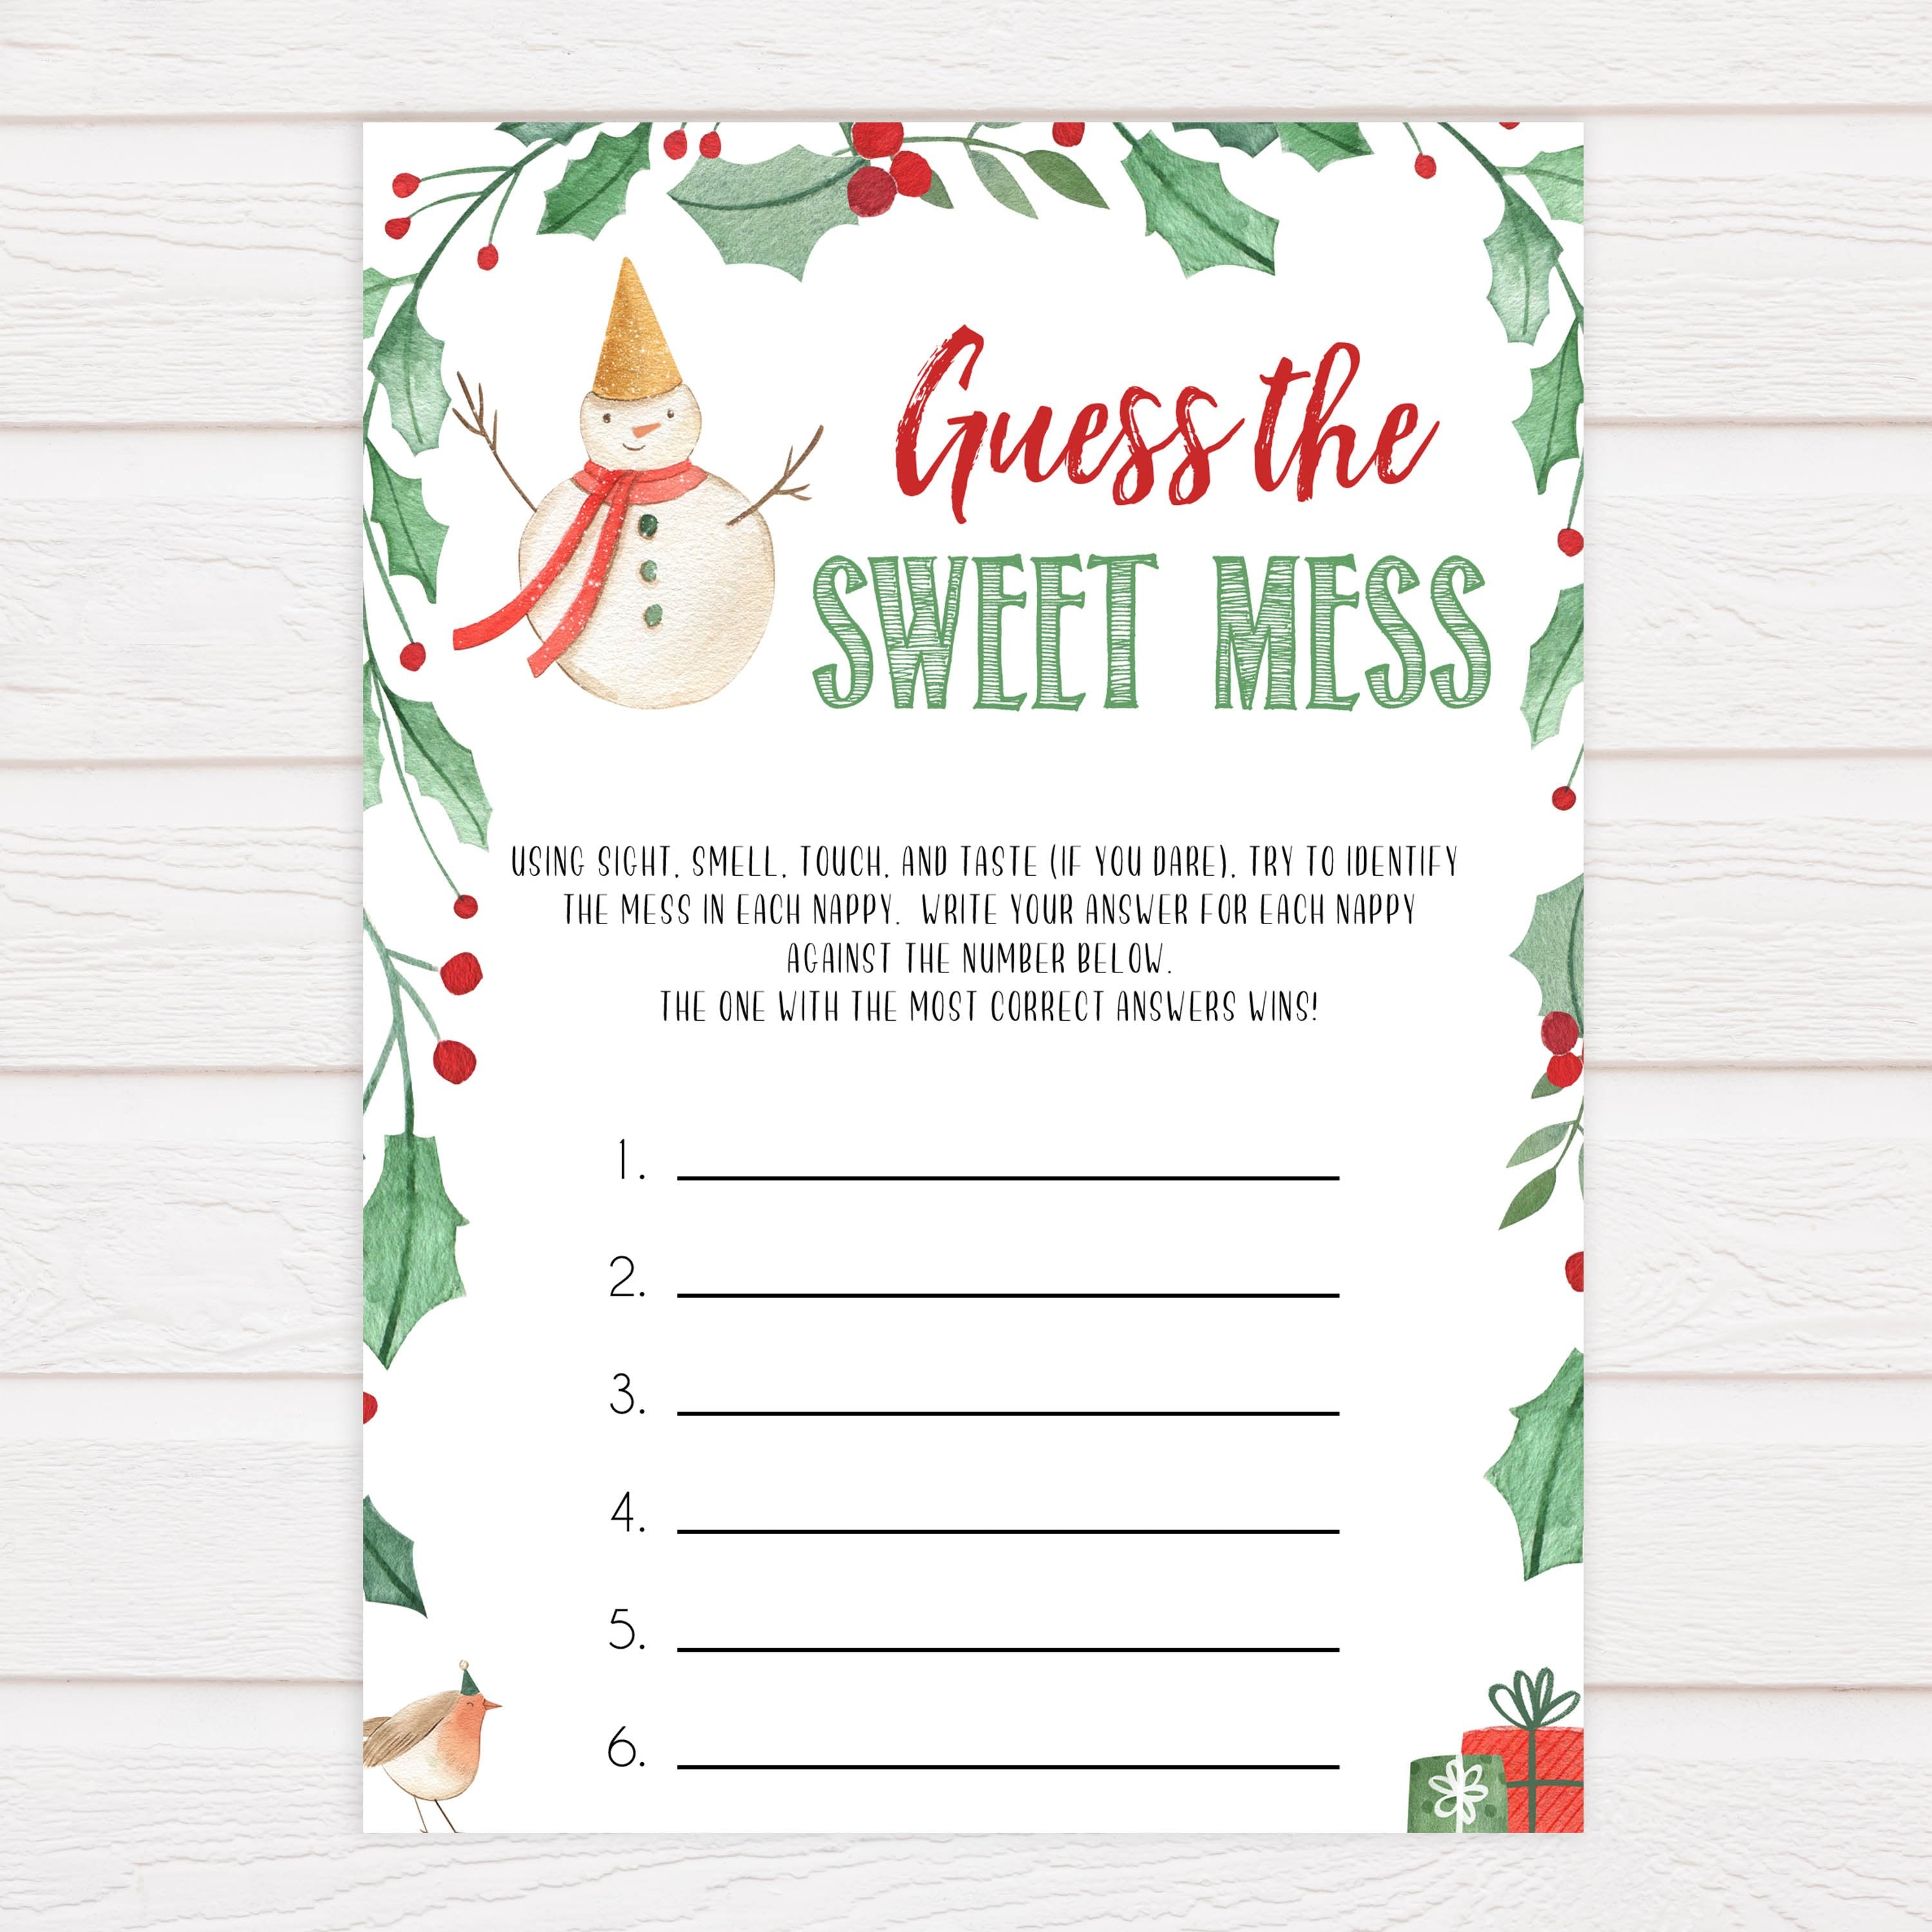 Christmas baby shower games, guess the sweet mess, festive baby shower games, best baby shower games, top 10 baby games, baby shower ideas, baby shower games